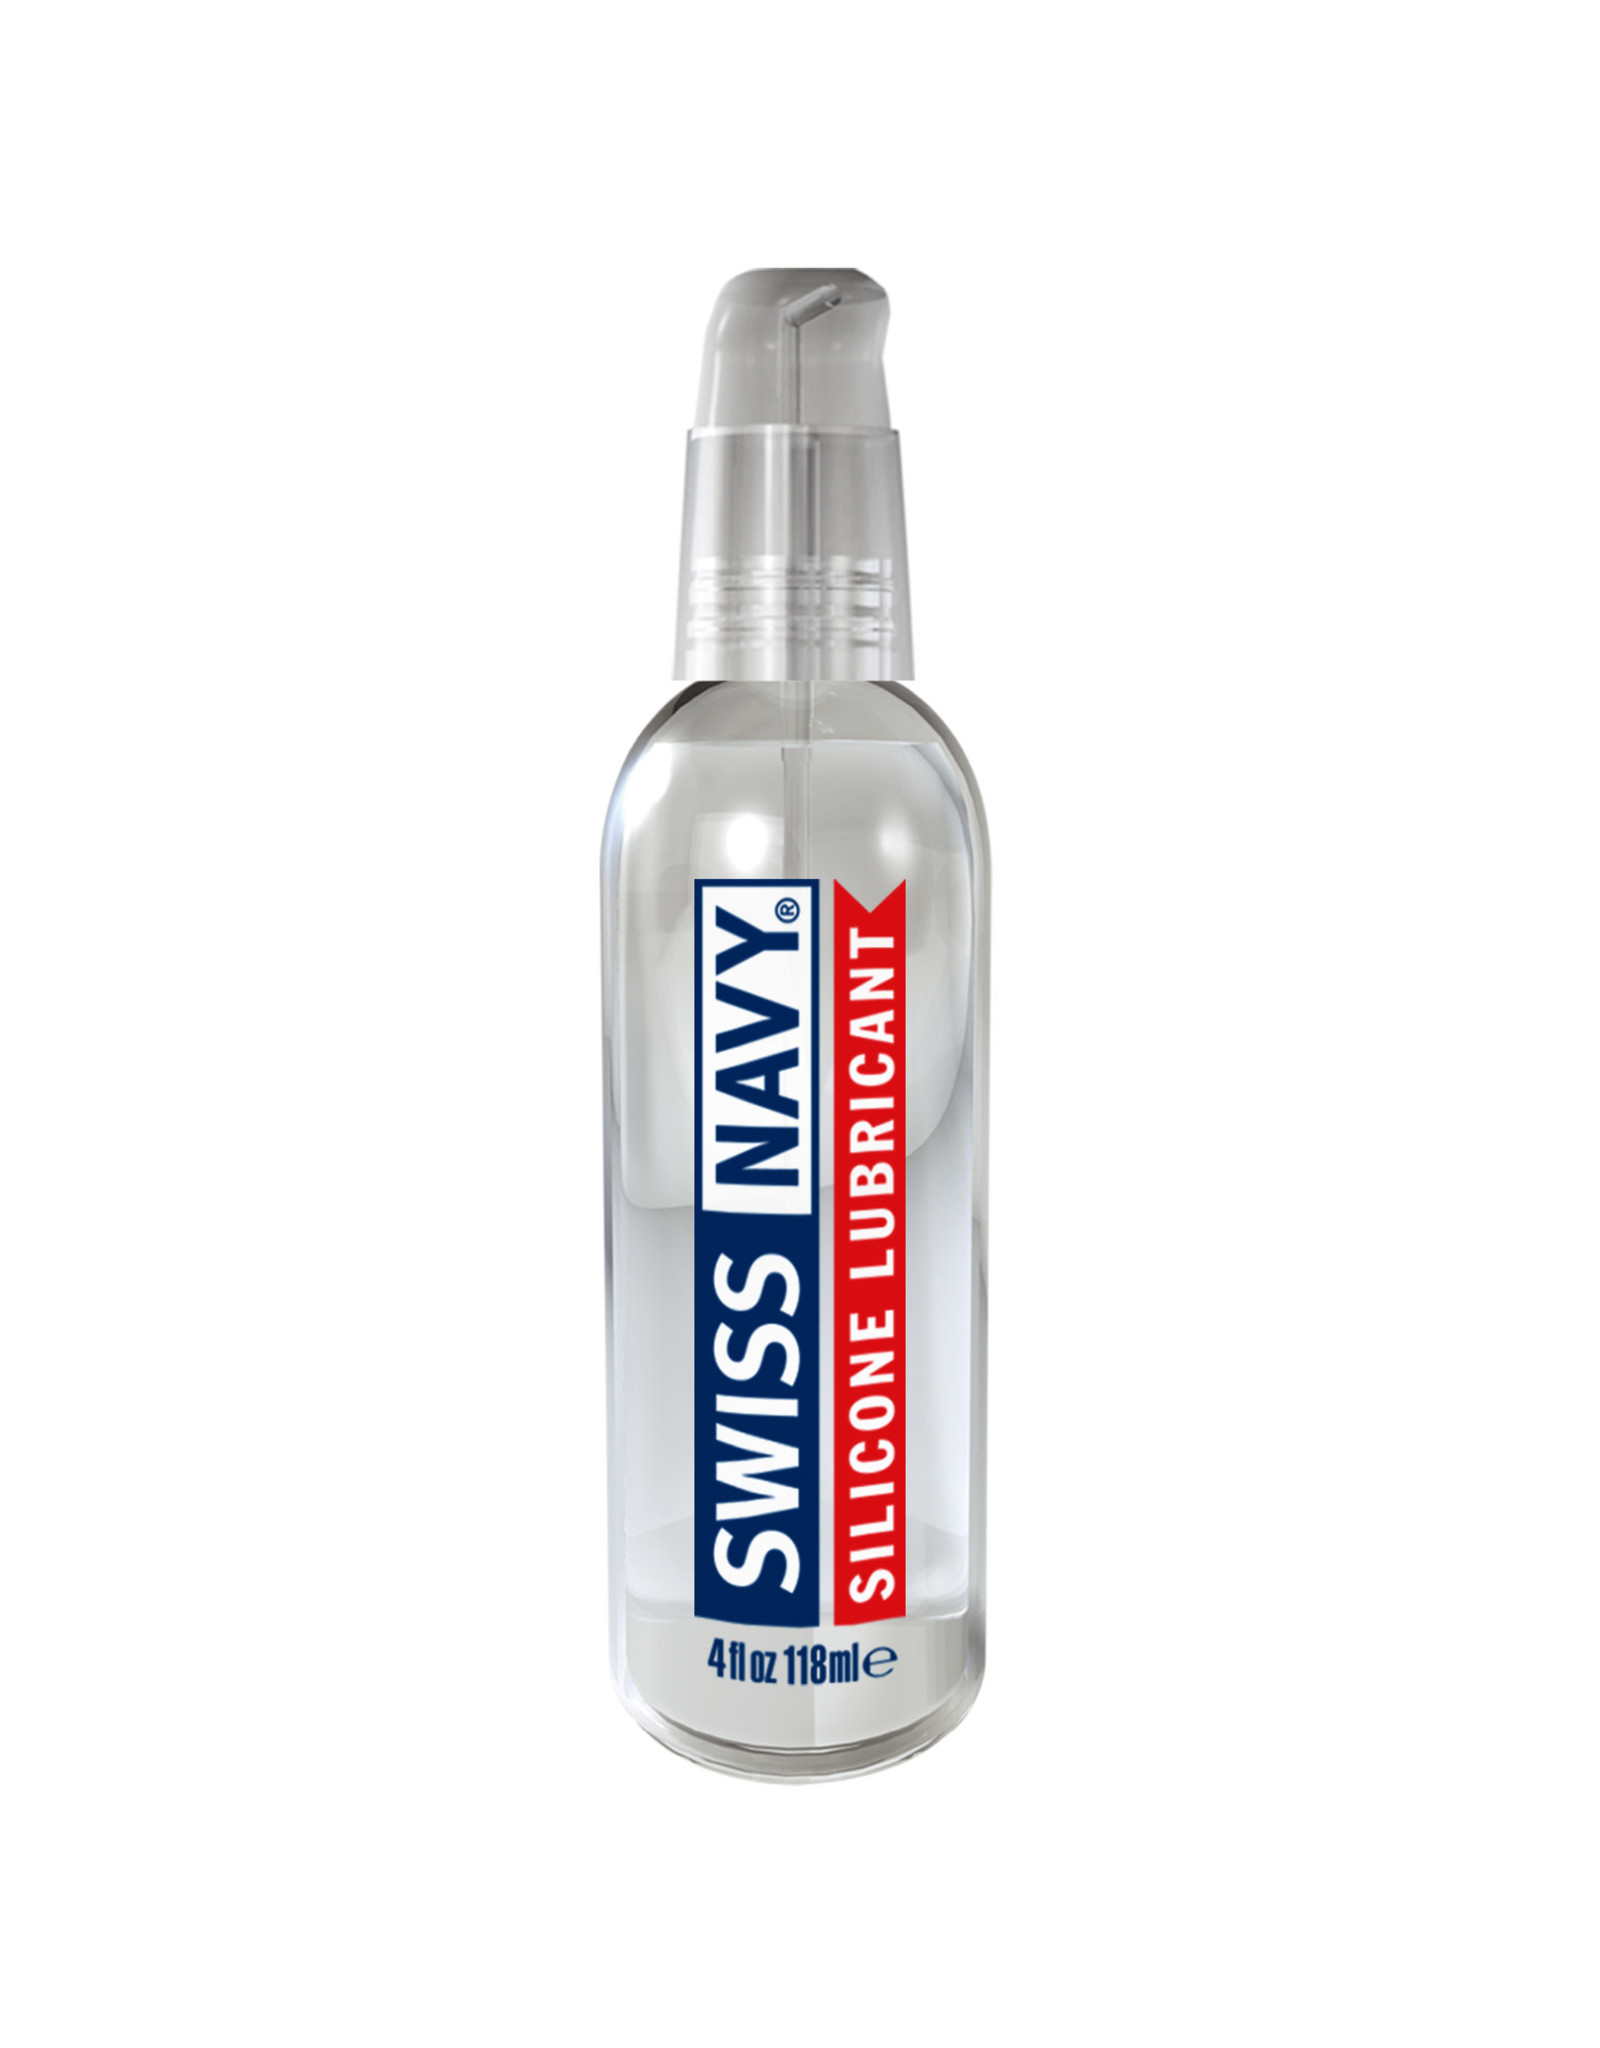 Swiss Navy Silicone Based